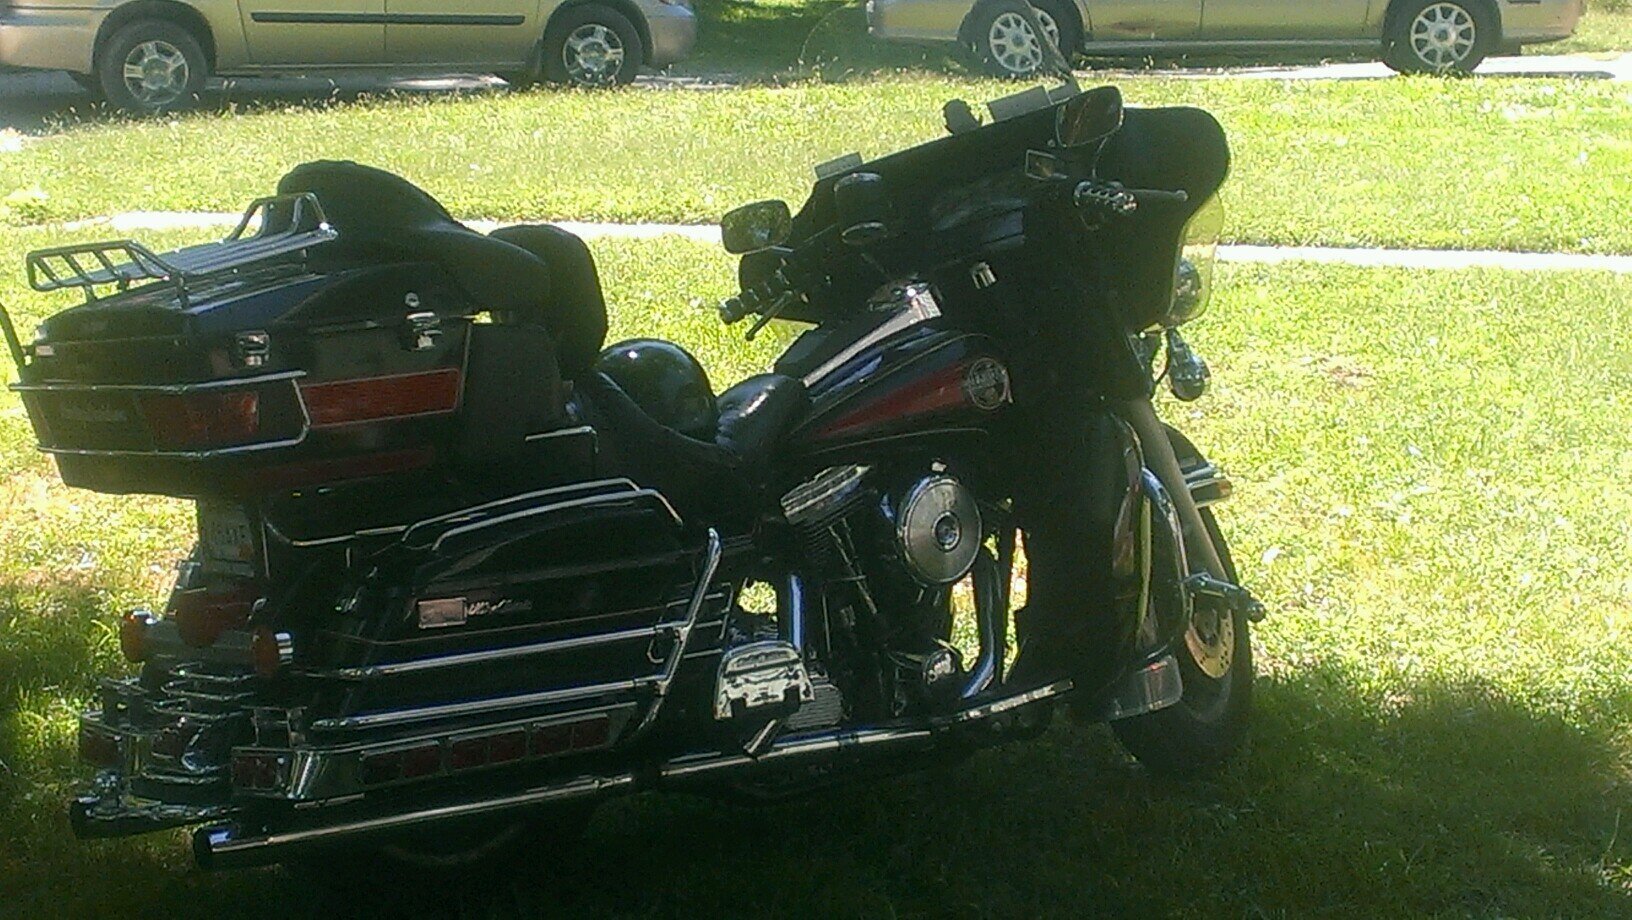 I'm a 50 yr old  man dedicated to  Christ, my family, my church. Member of Christian Motorcycle  Assn. motto: it's all about Jesus